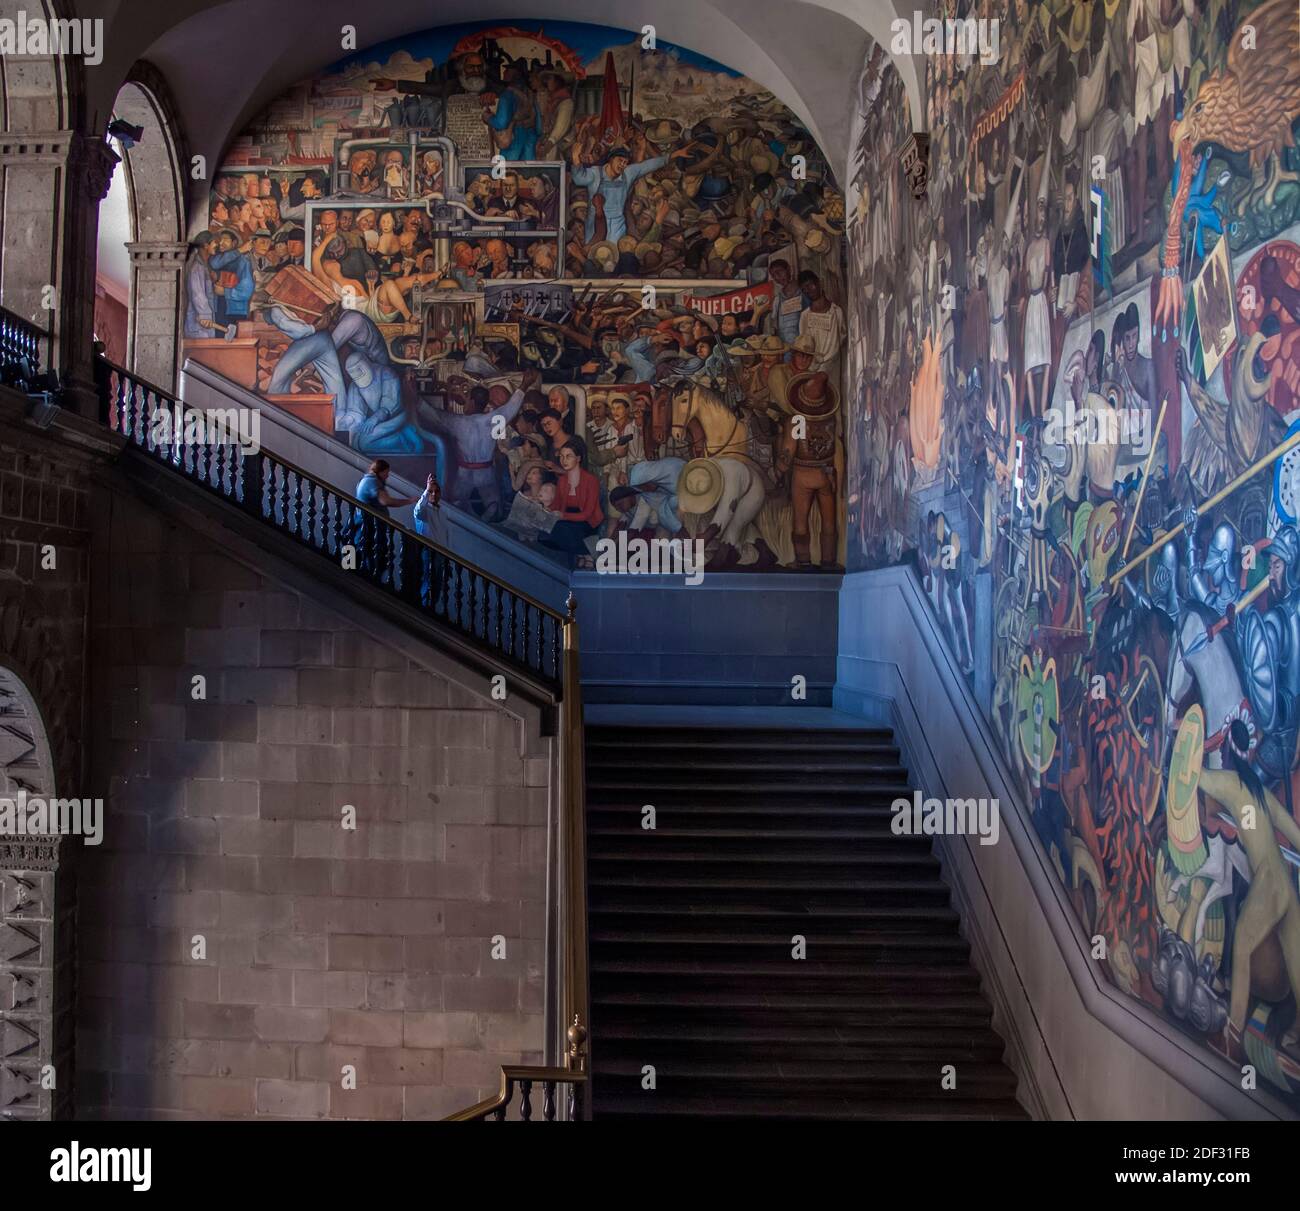 Diego Rivera murals in National Palace, Mexico City, Mexico Stock Photo